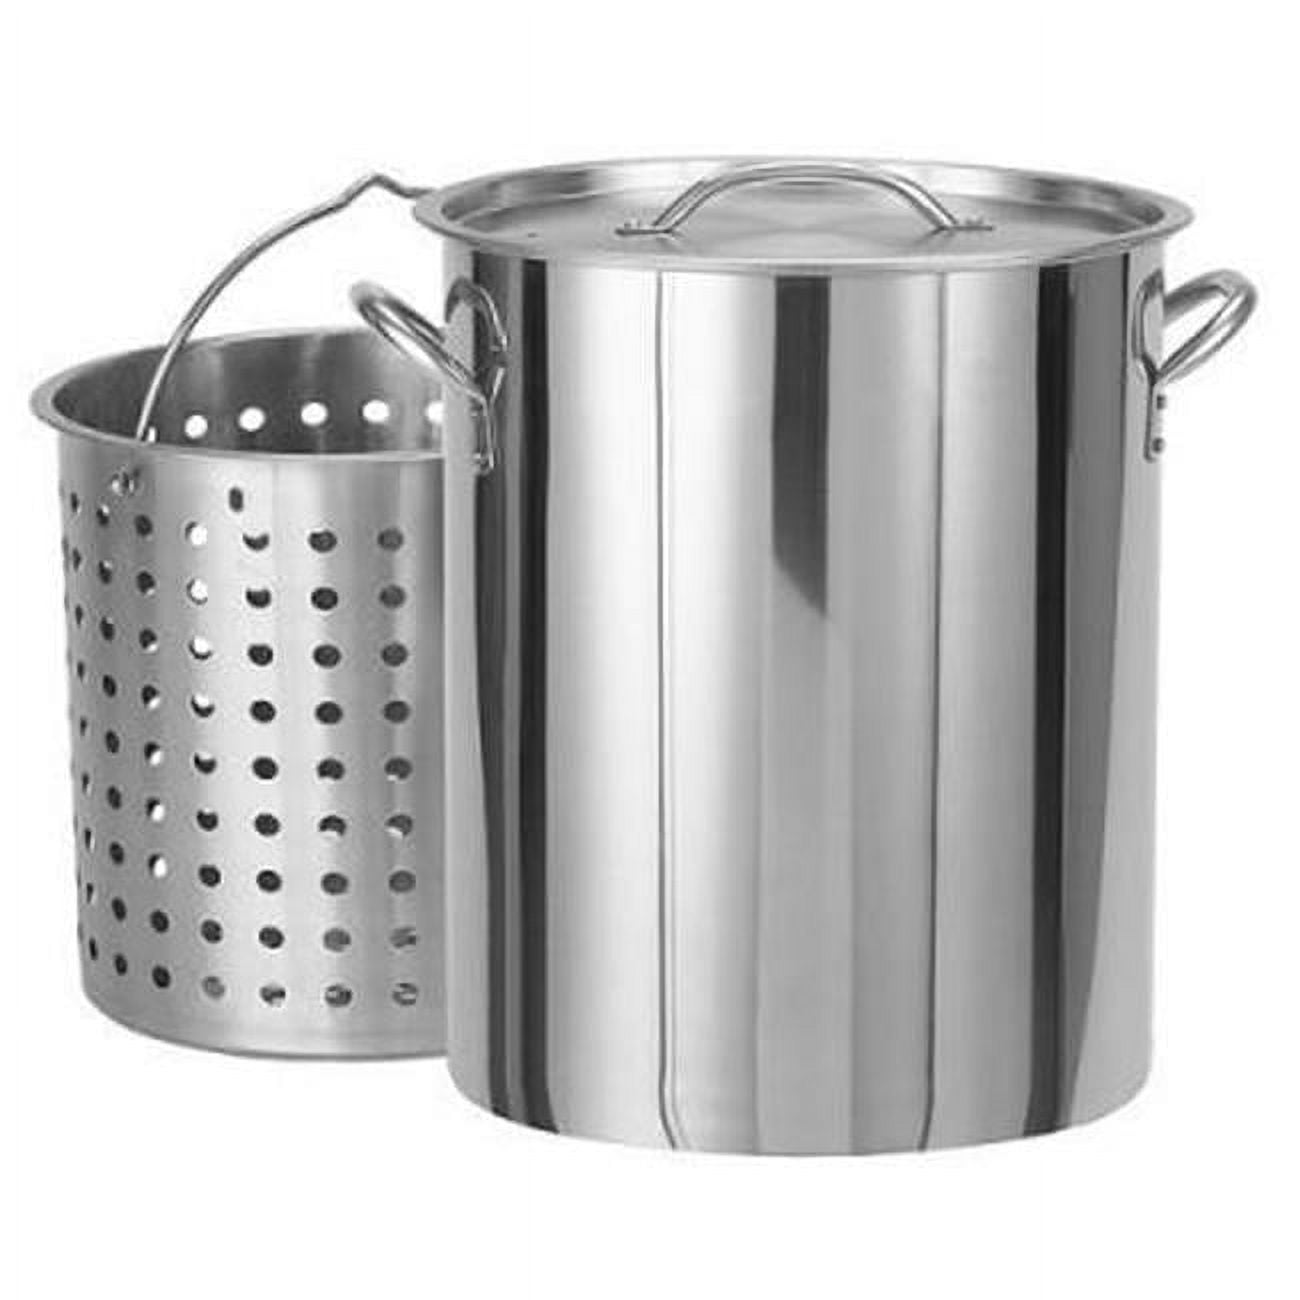 Ovente 4.8 Quart Stovetop Stainless Steel Pasta Pot with Strainer Lid & Locking